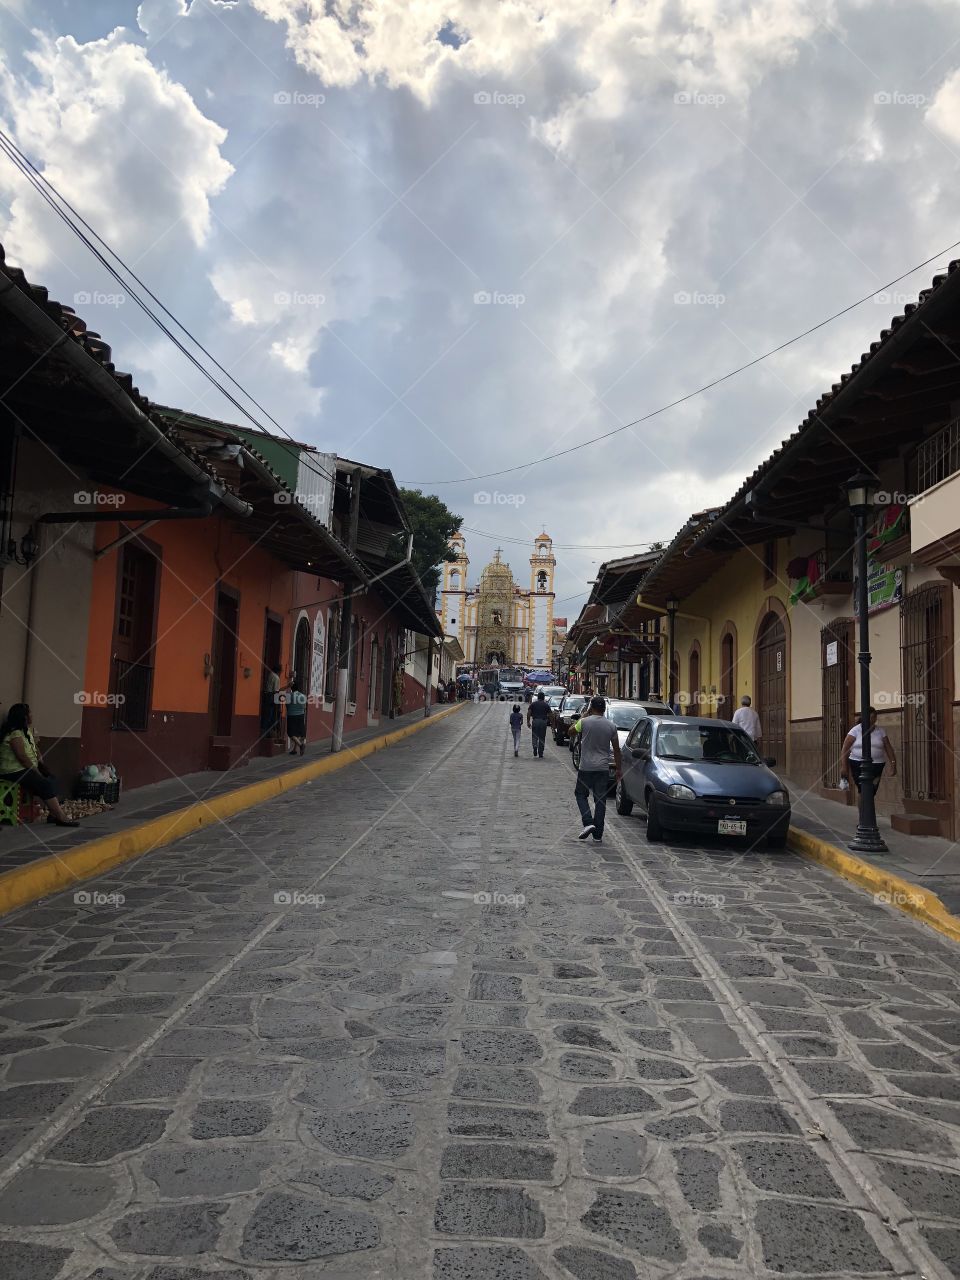 Old Town. The rocky roads, the clouds, the church and the friendly people. The Xico Festival has a lot to offer. Food, drinks and carnival. 